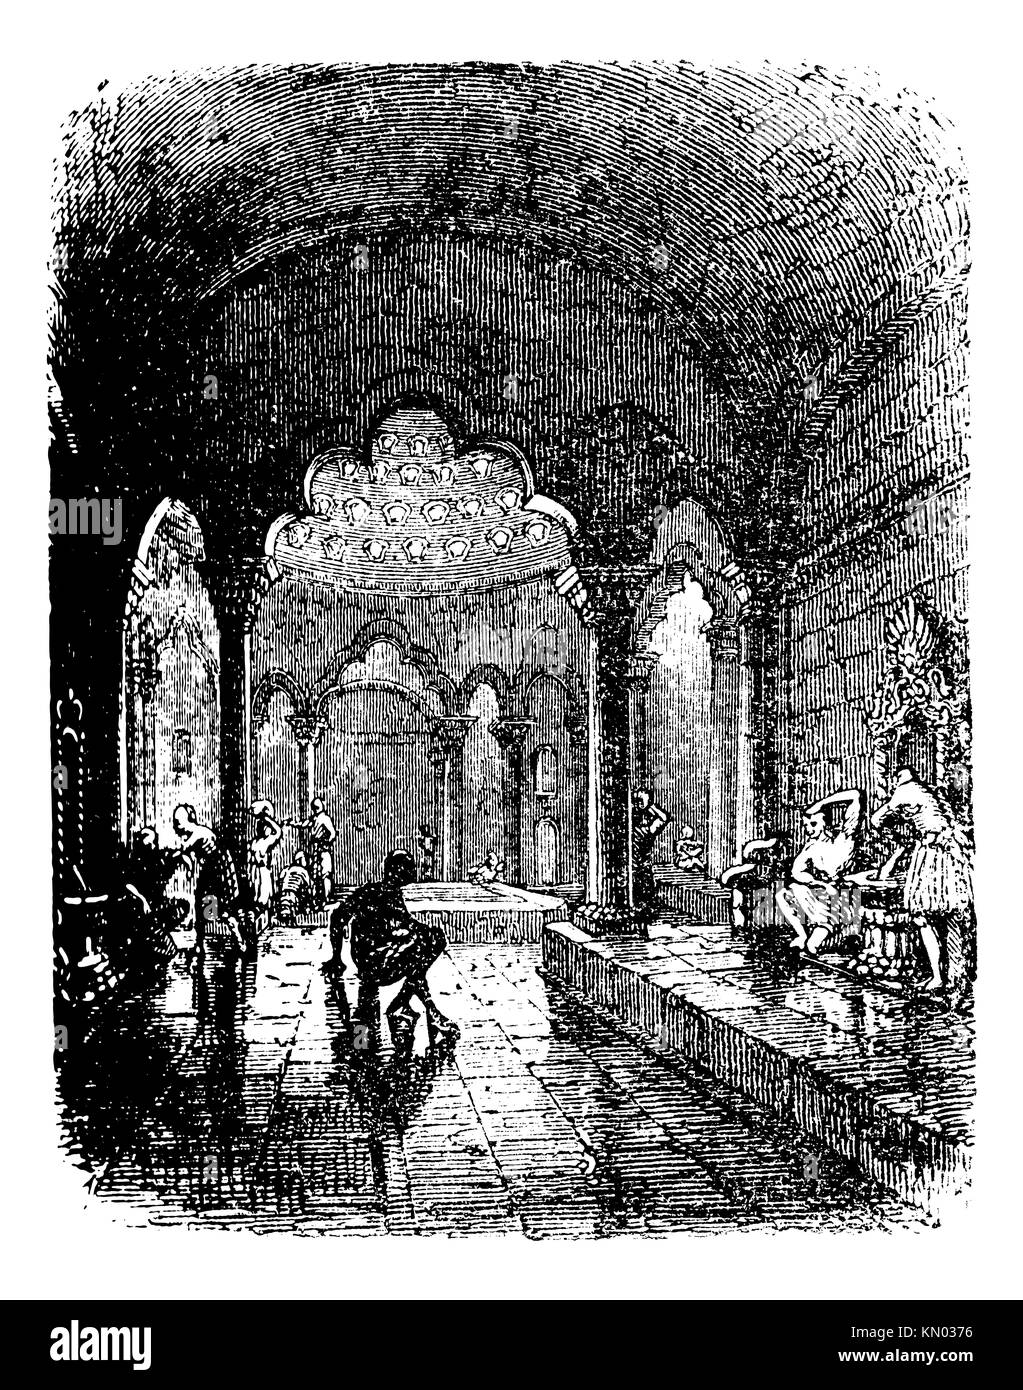 Turkish Bath, during the 1890s, vintage engraving  Old engraved illustration of a Turkish Bath Stock Photo